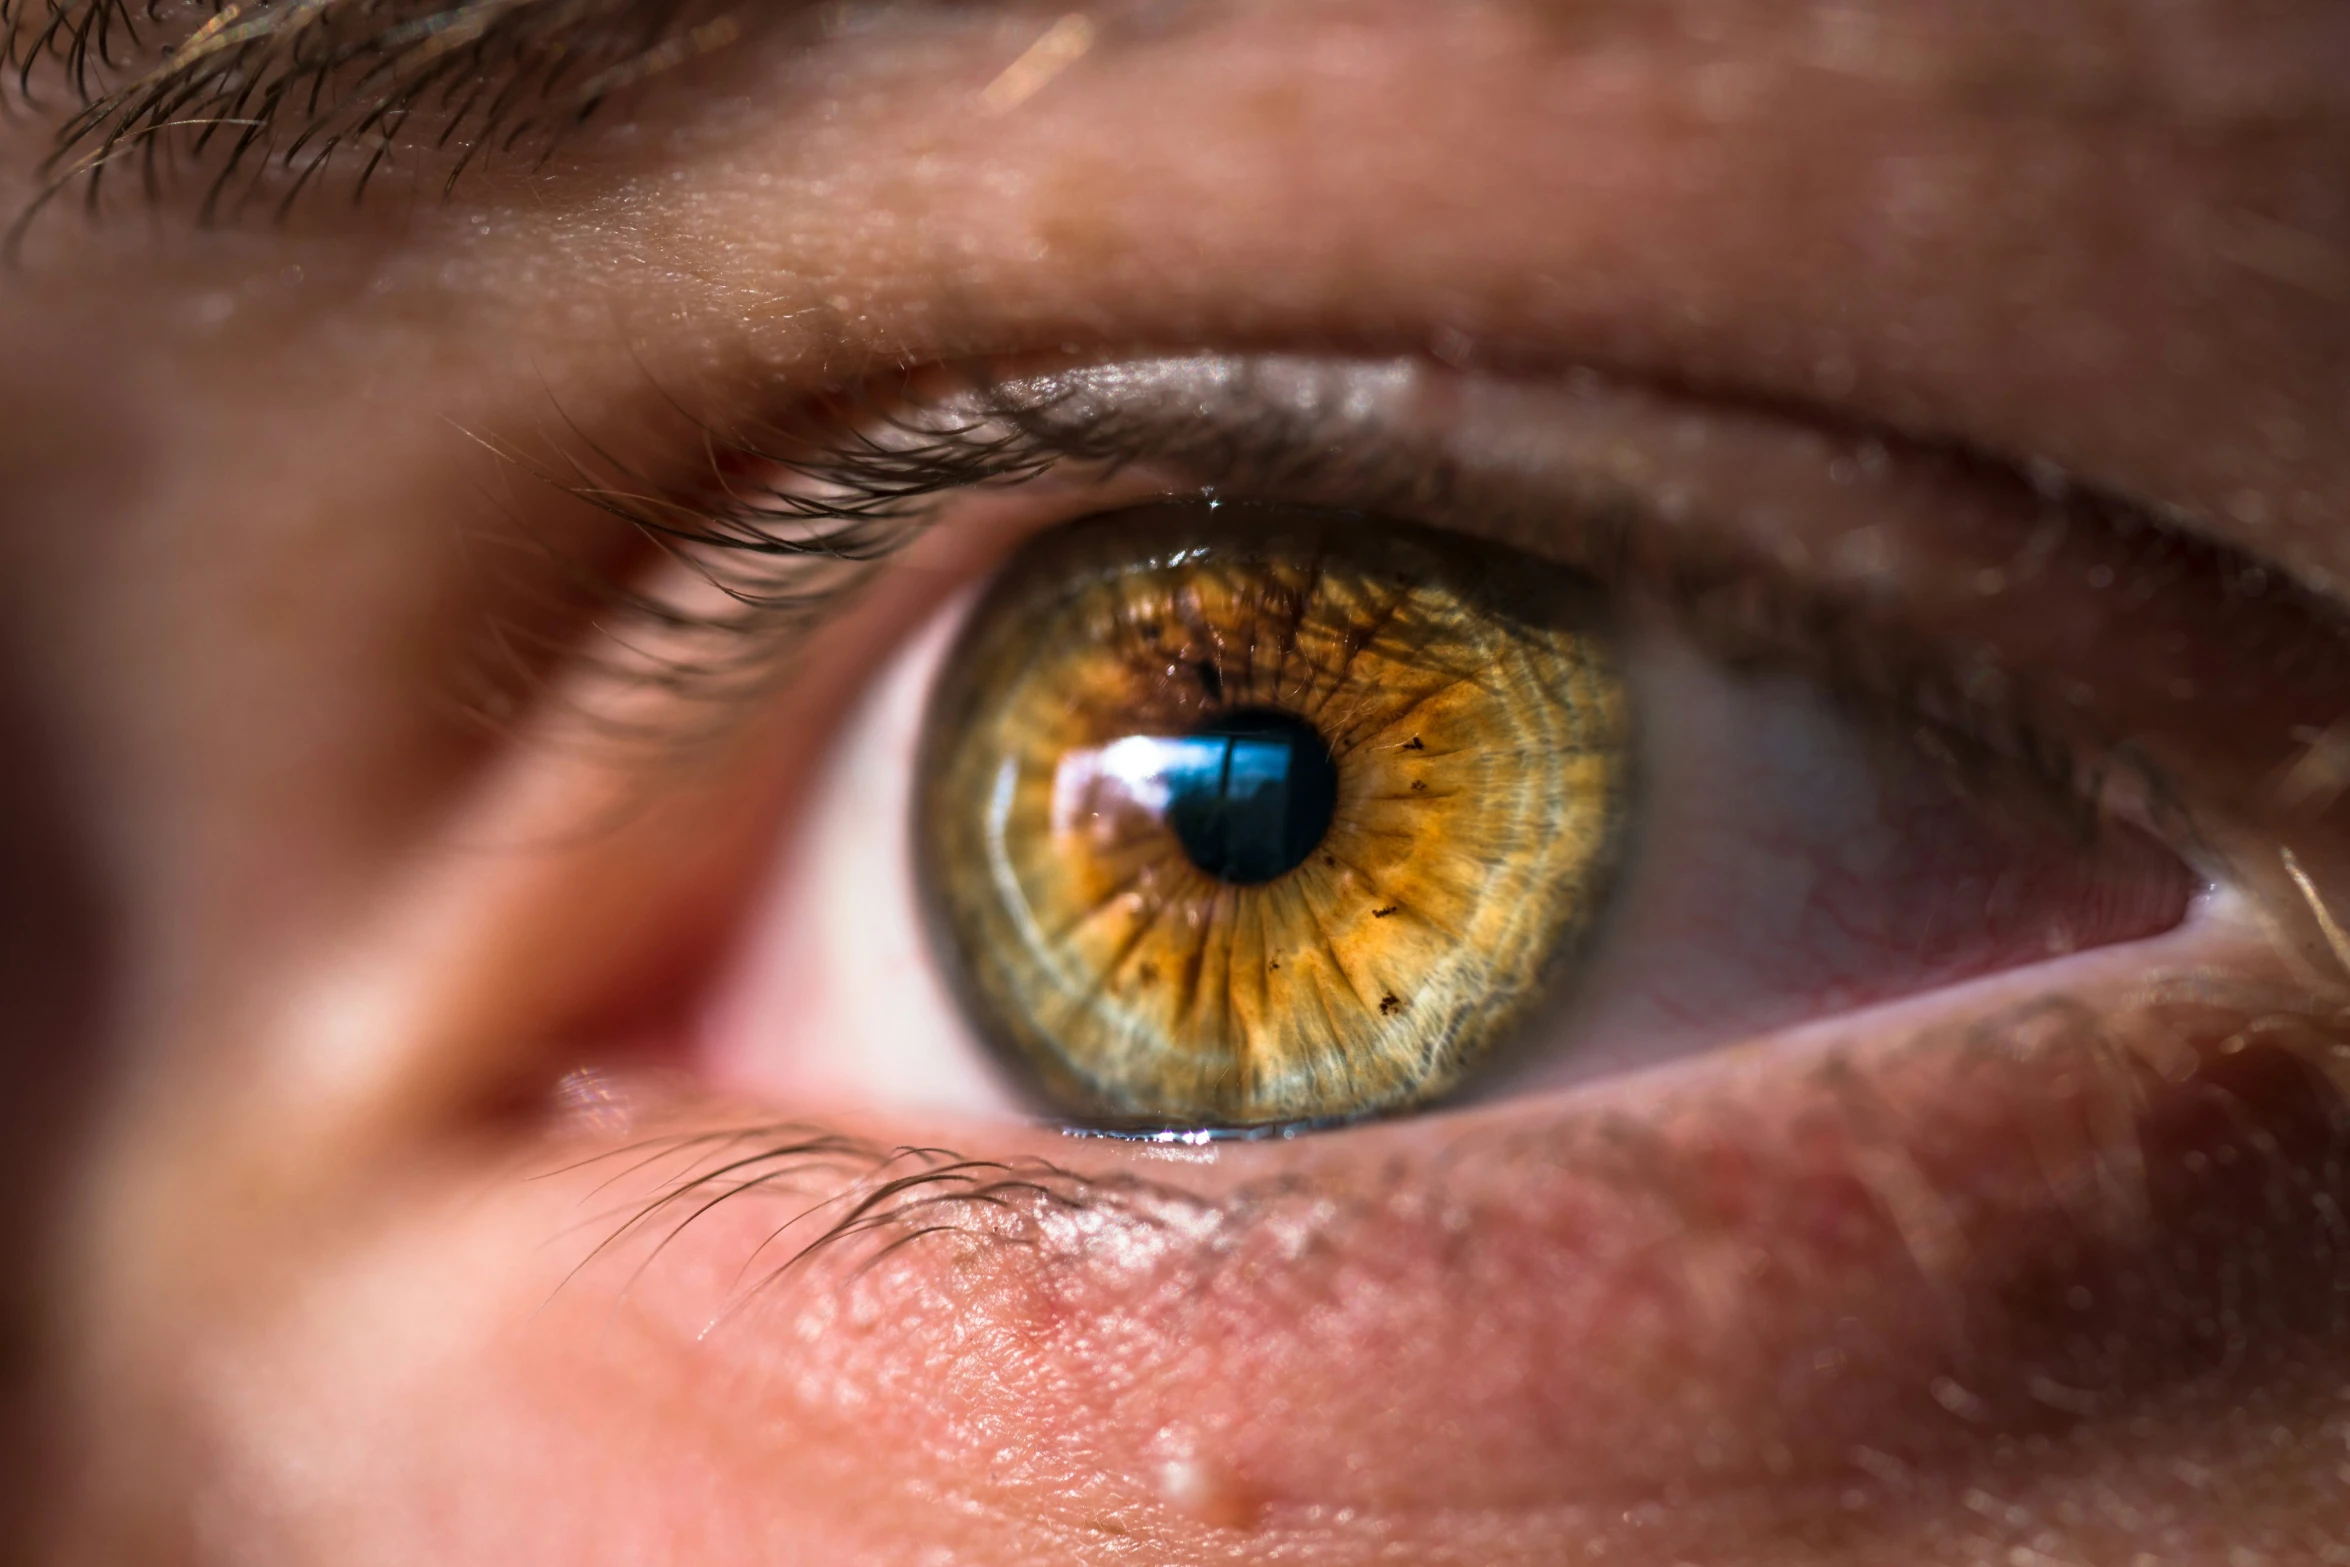 a green eyed person has yellow and blue iris